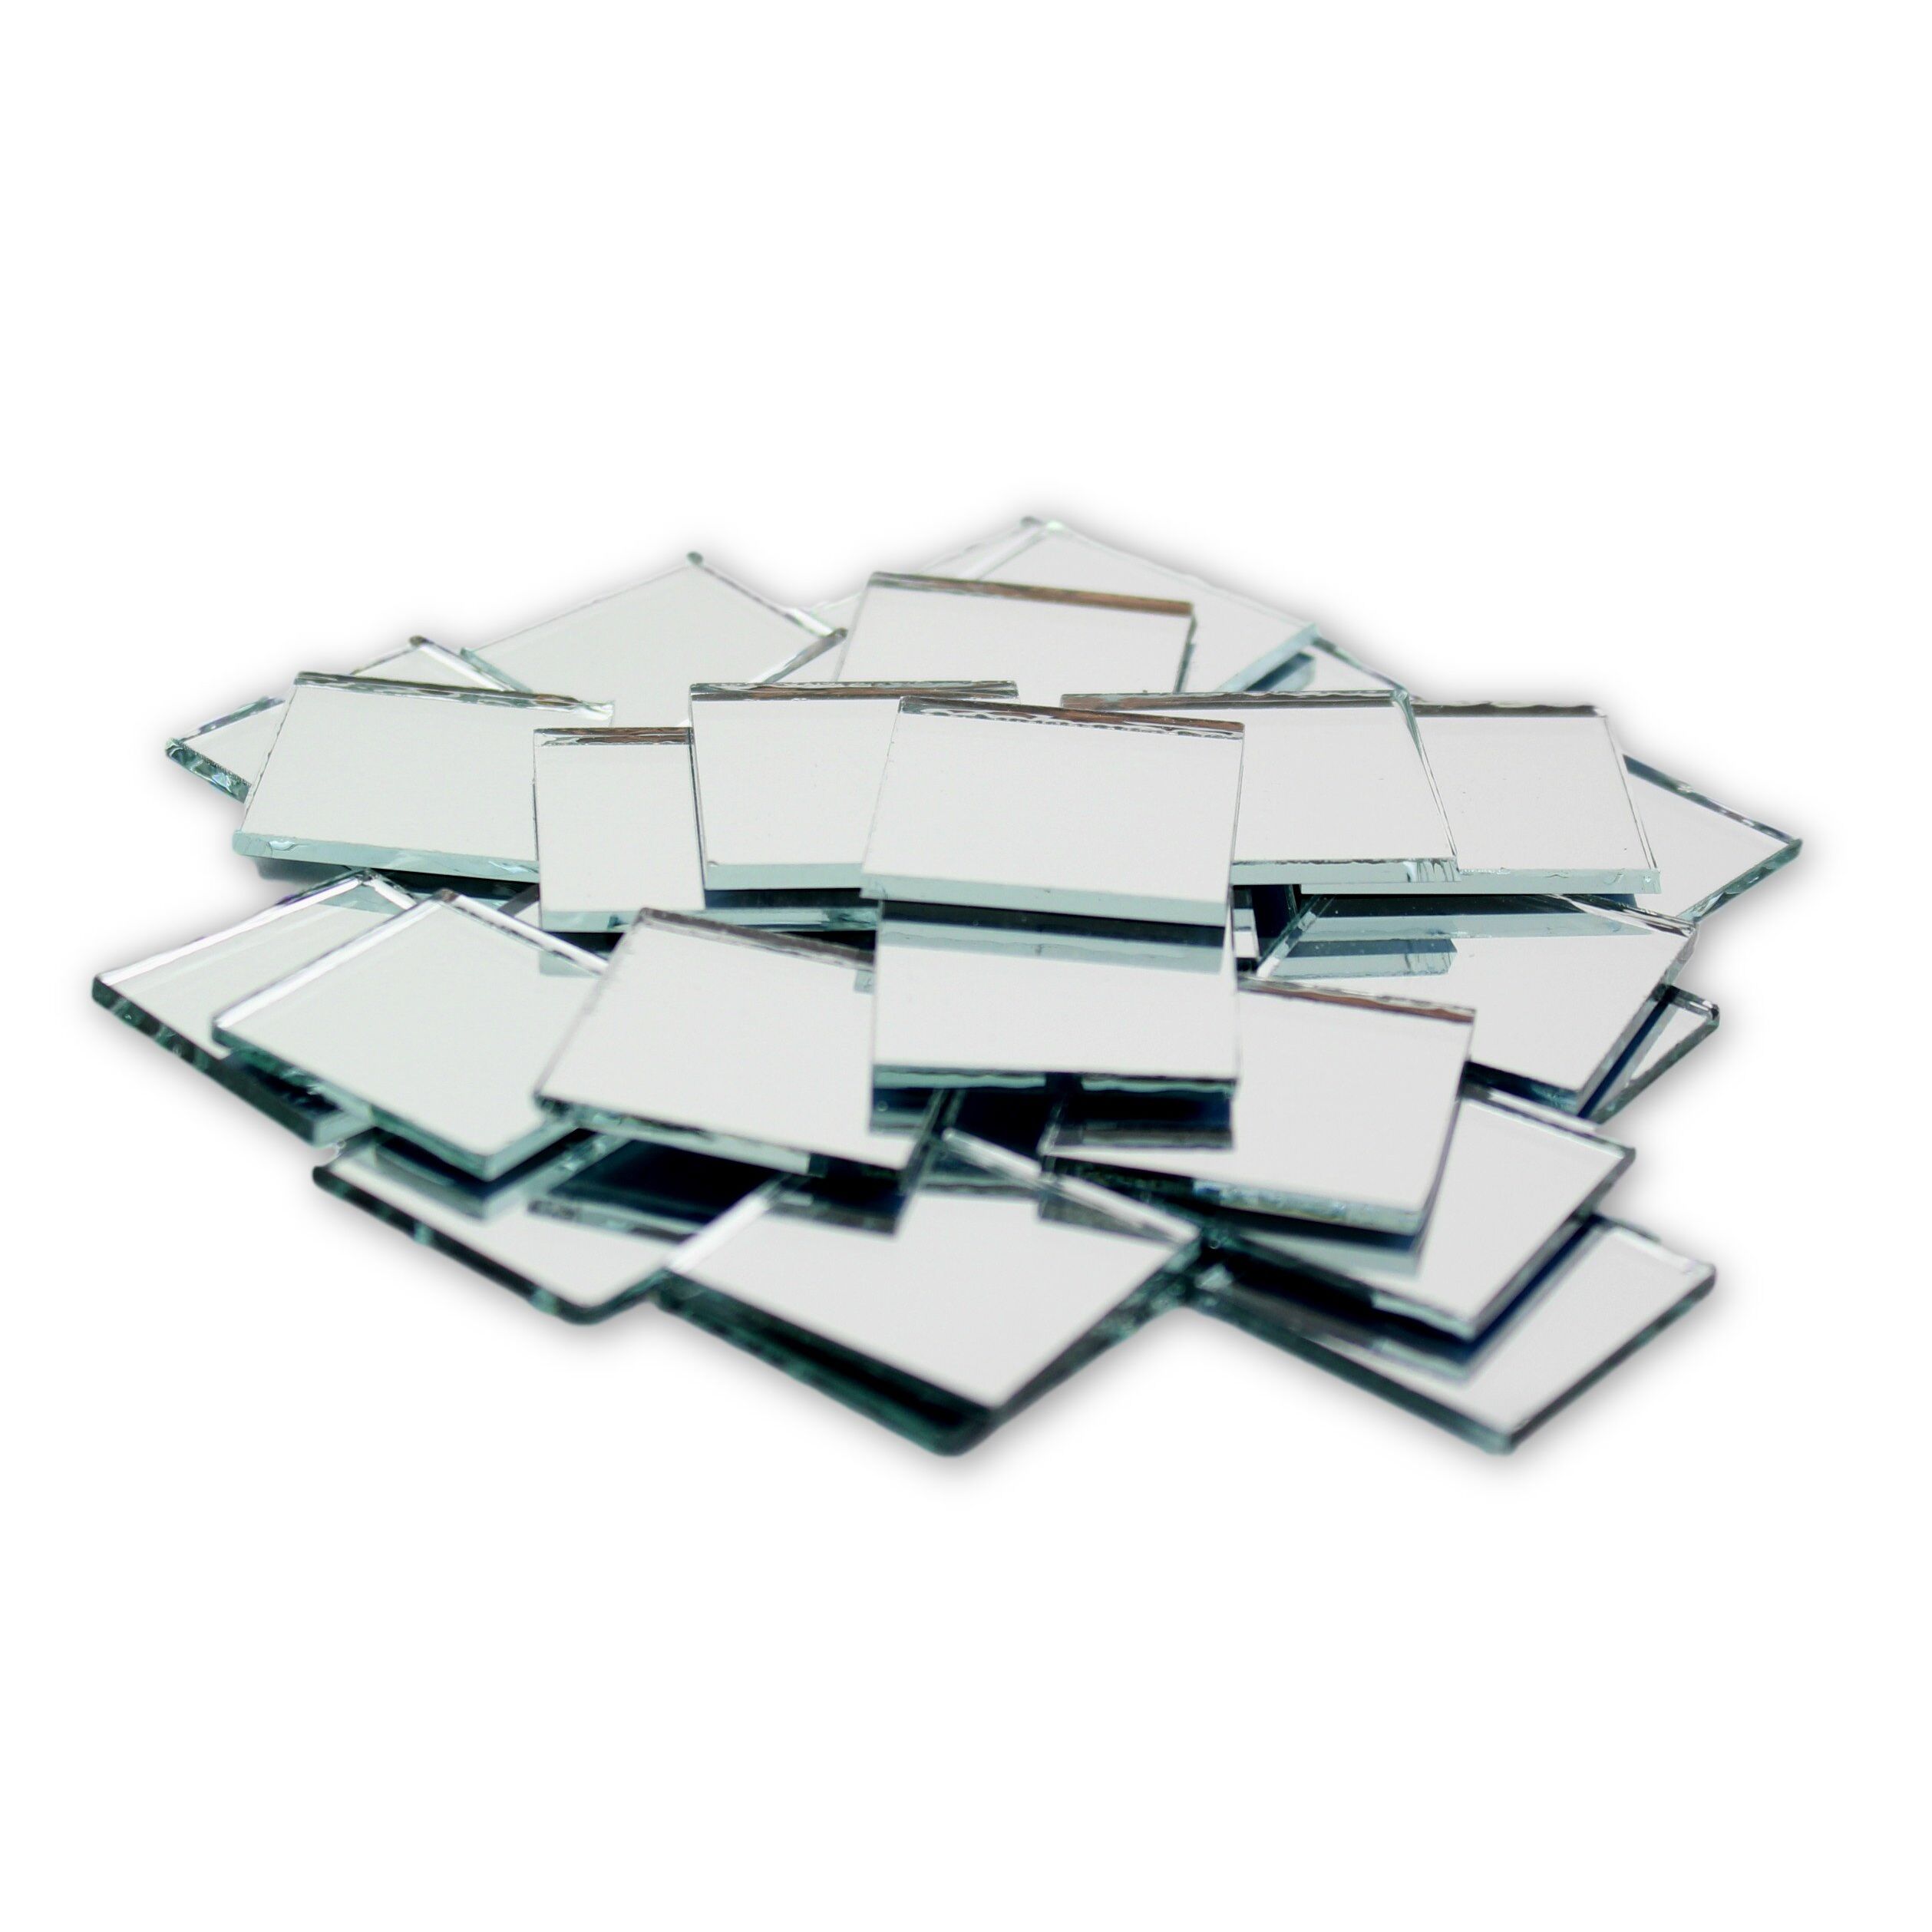 Wholesale PandaHall 190 pcs 12mm(0.47 Inch) Square Glass Mirror Tiles Mini  Glass Decorative Mosaic Tiles for Home Decoration Crafts Jewelry Making 